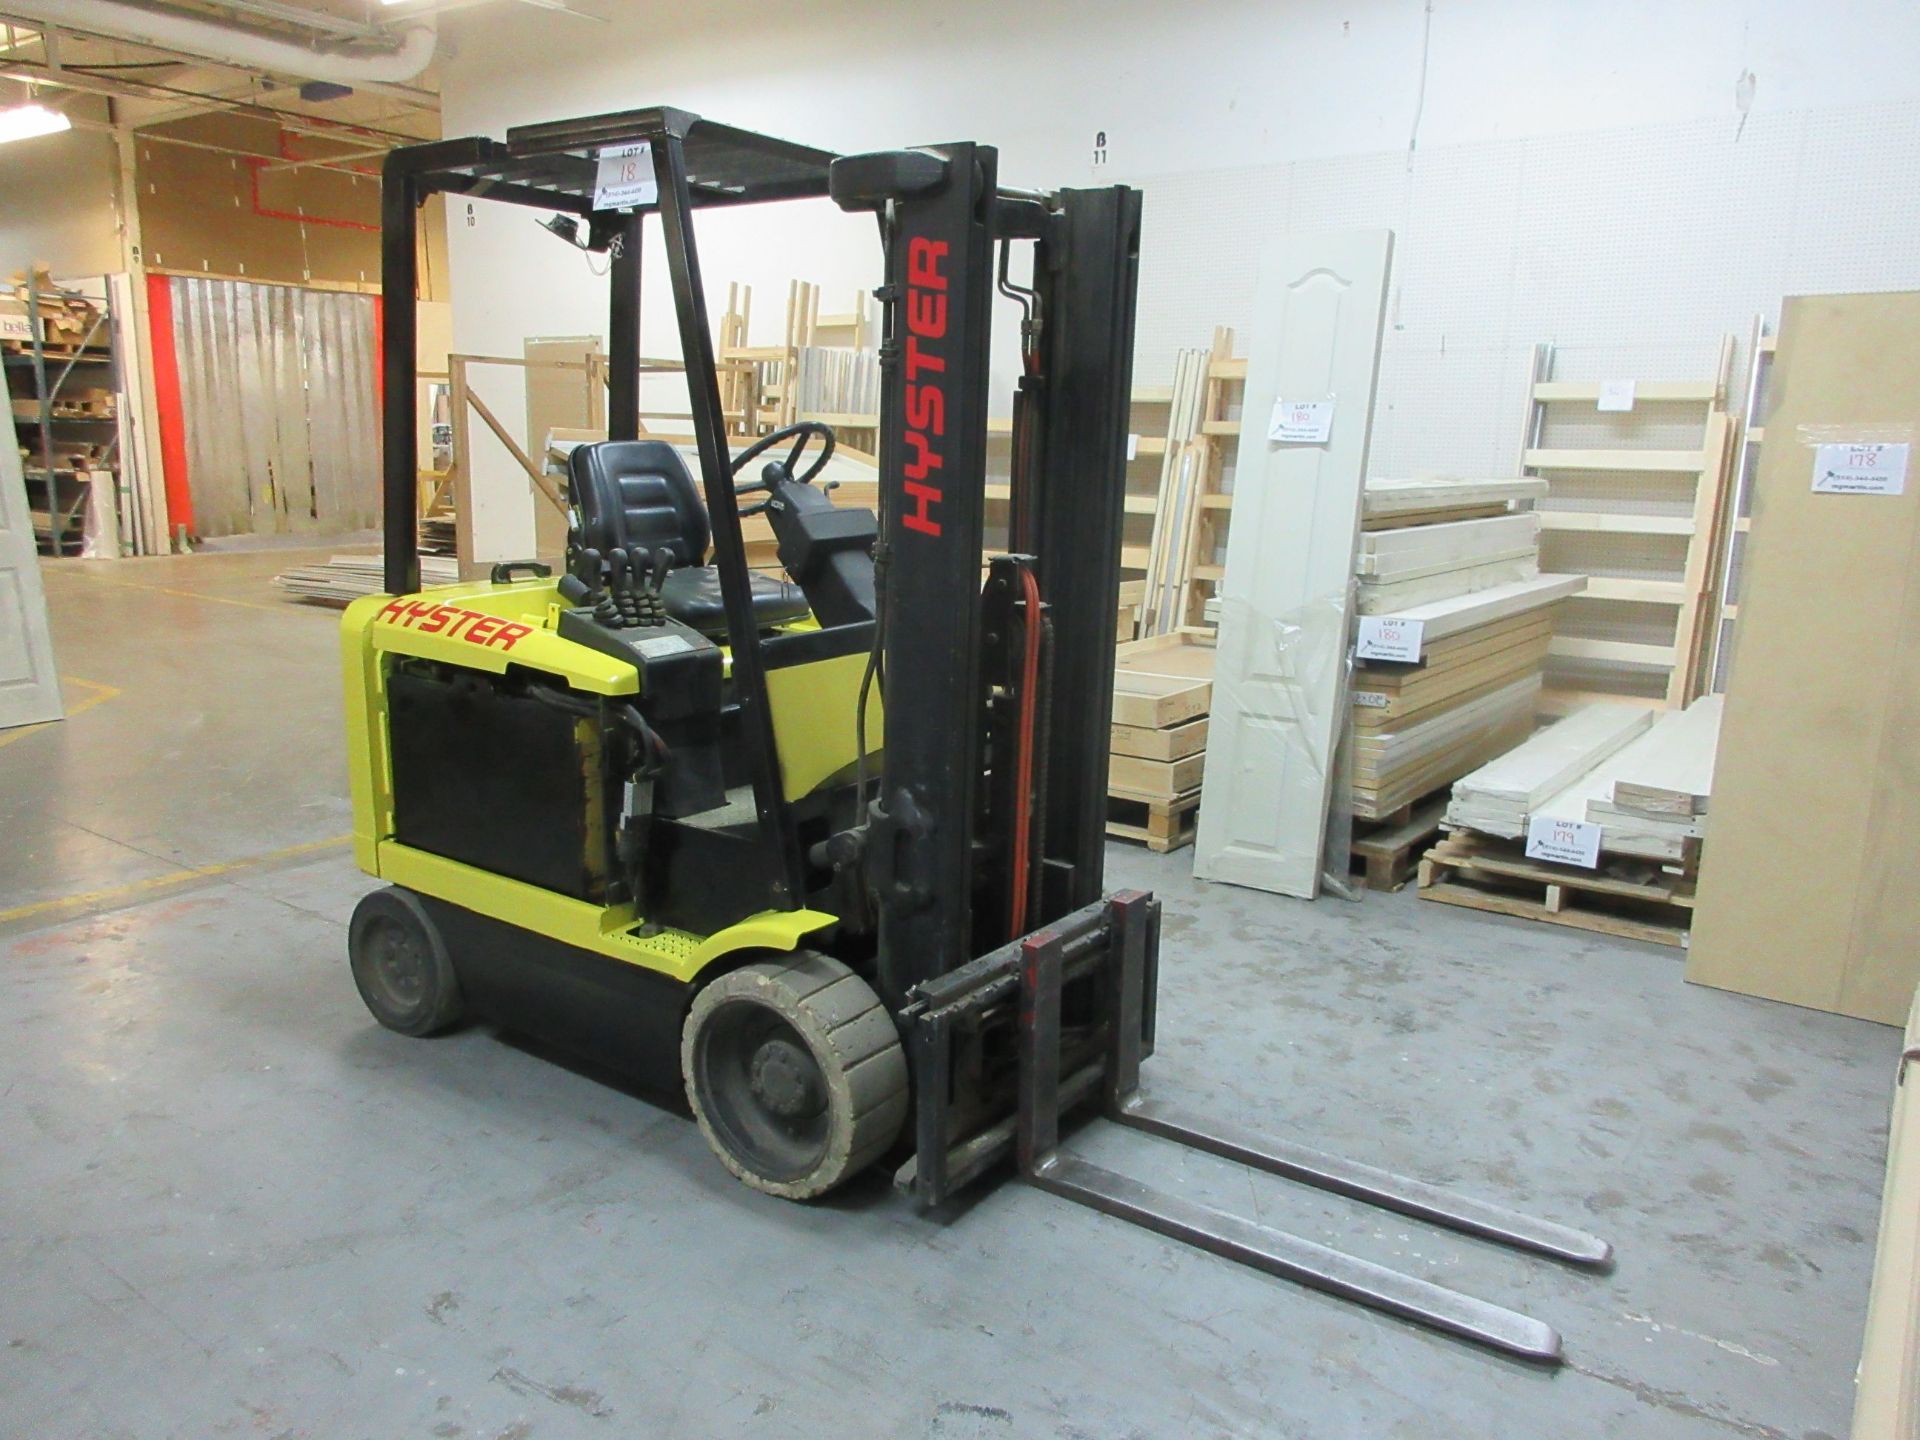 HYSTER Electric forklift Mod: E60XM-33, 2 sections, side shift, 36 volts w/t Ferro Five EFR